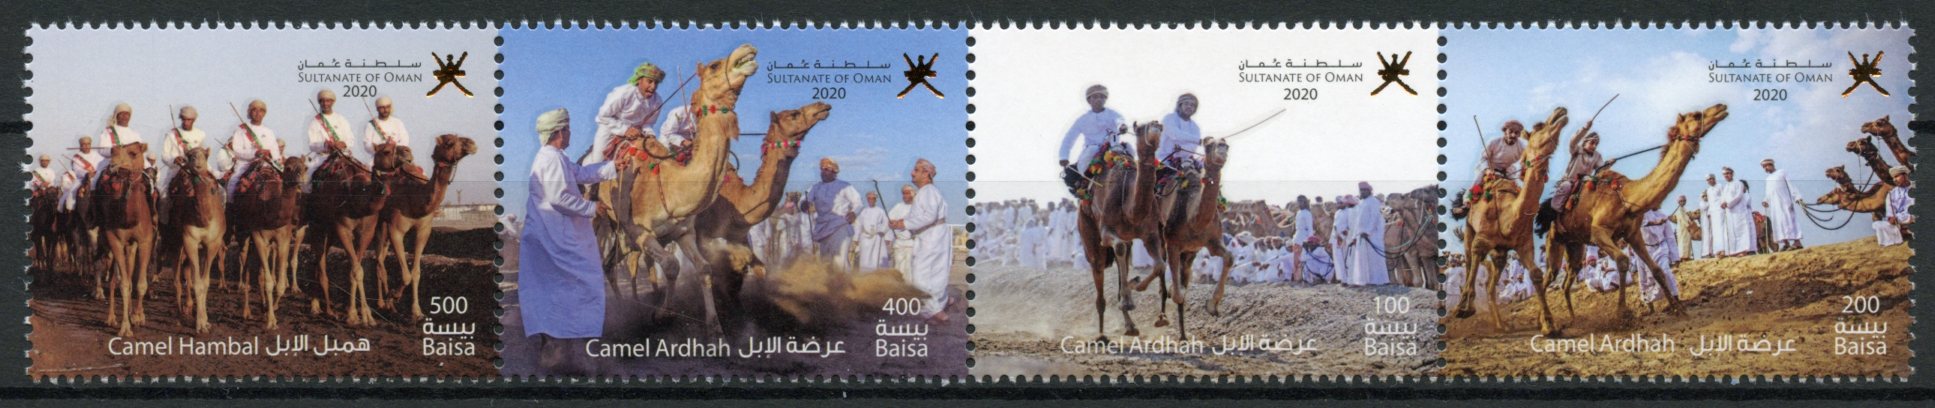 Oman 2020 MNH Cultures & Traditions Stamps Camels Camel Hambal Ardhah 4v Strip